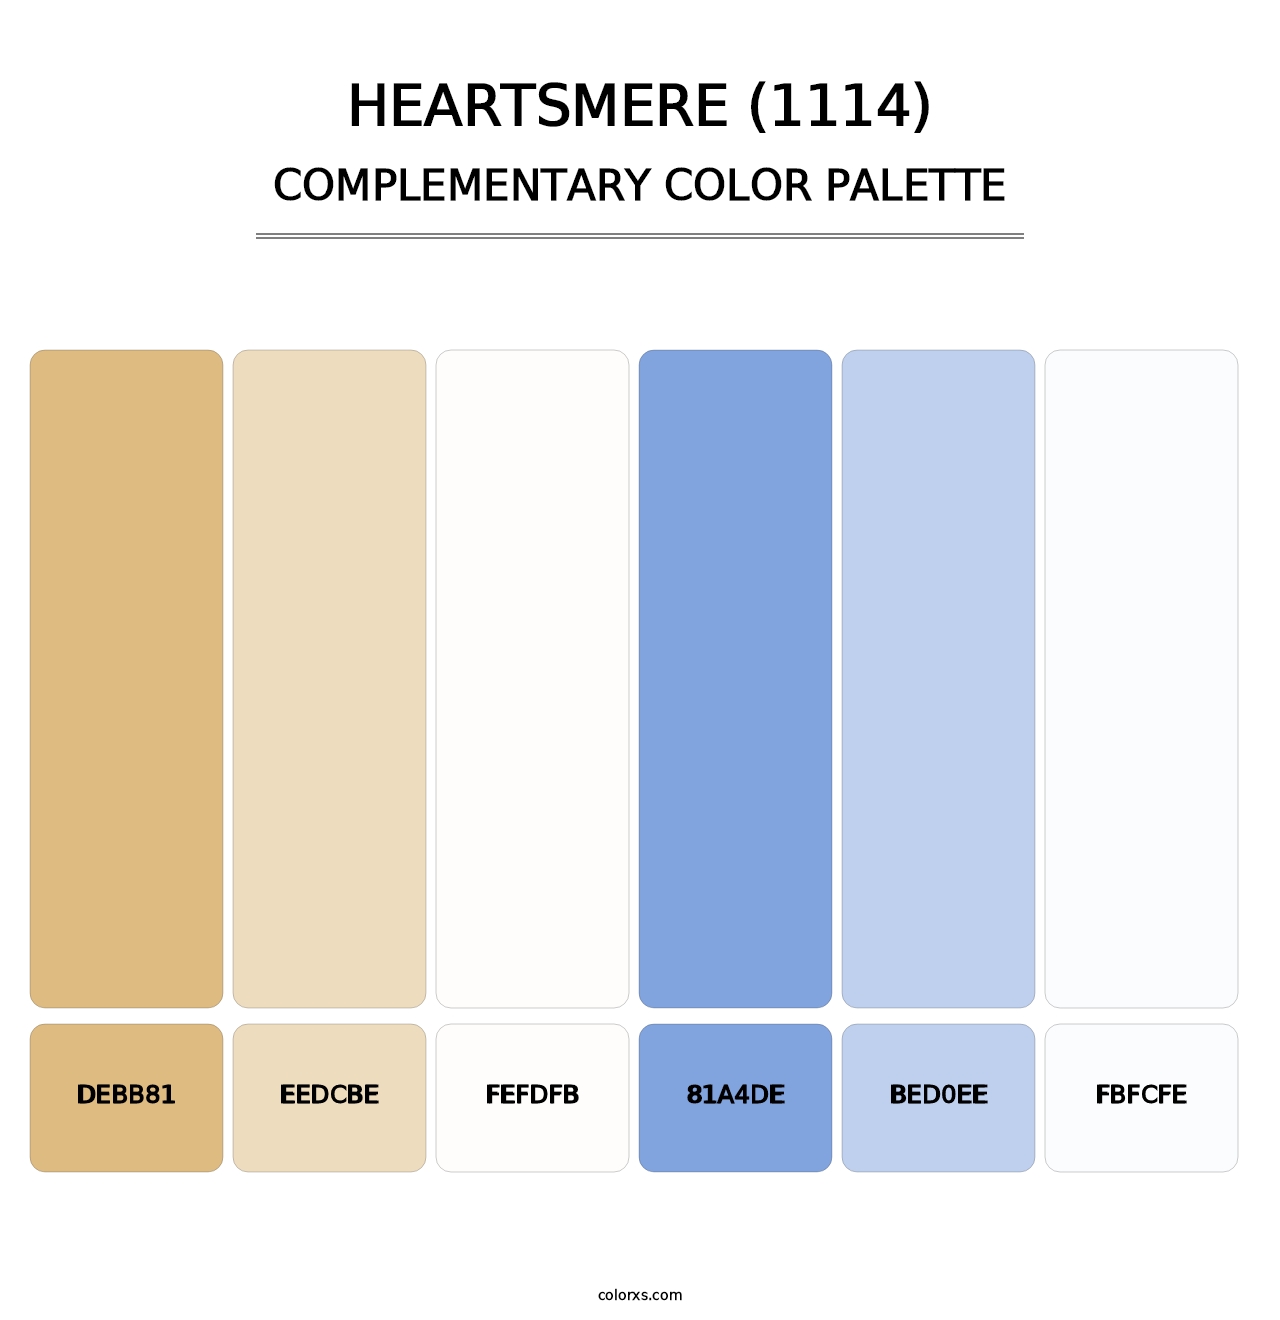 Heartsmere (1114) - Complementary Color Palette